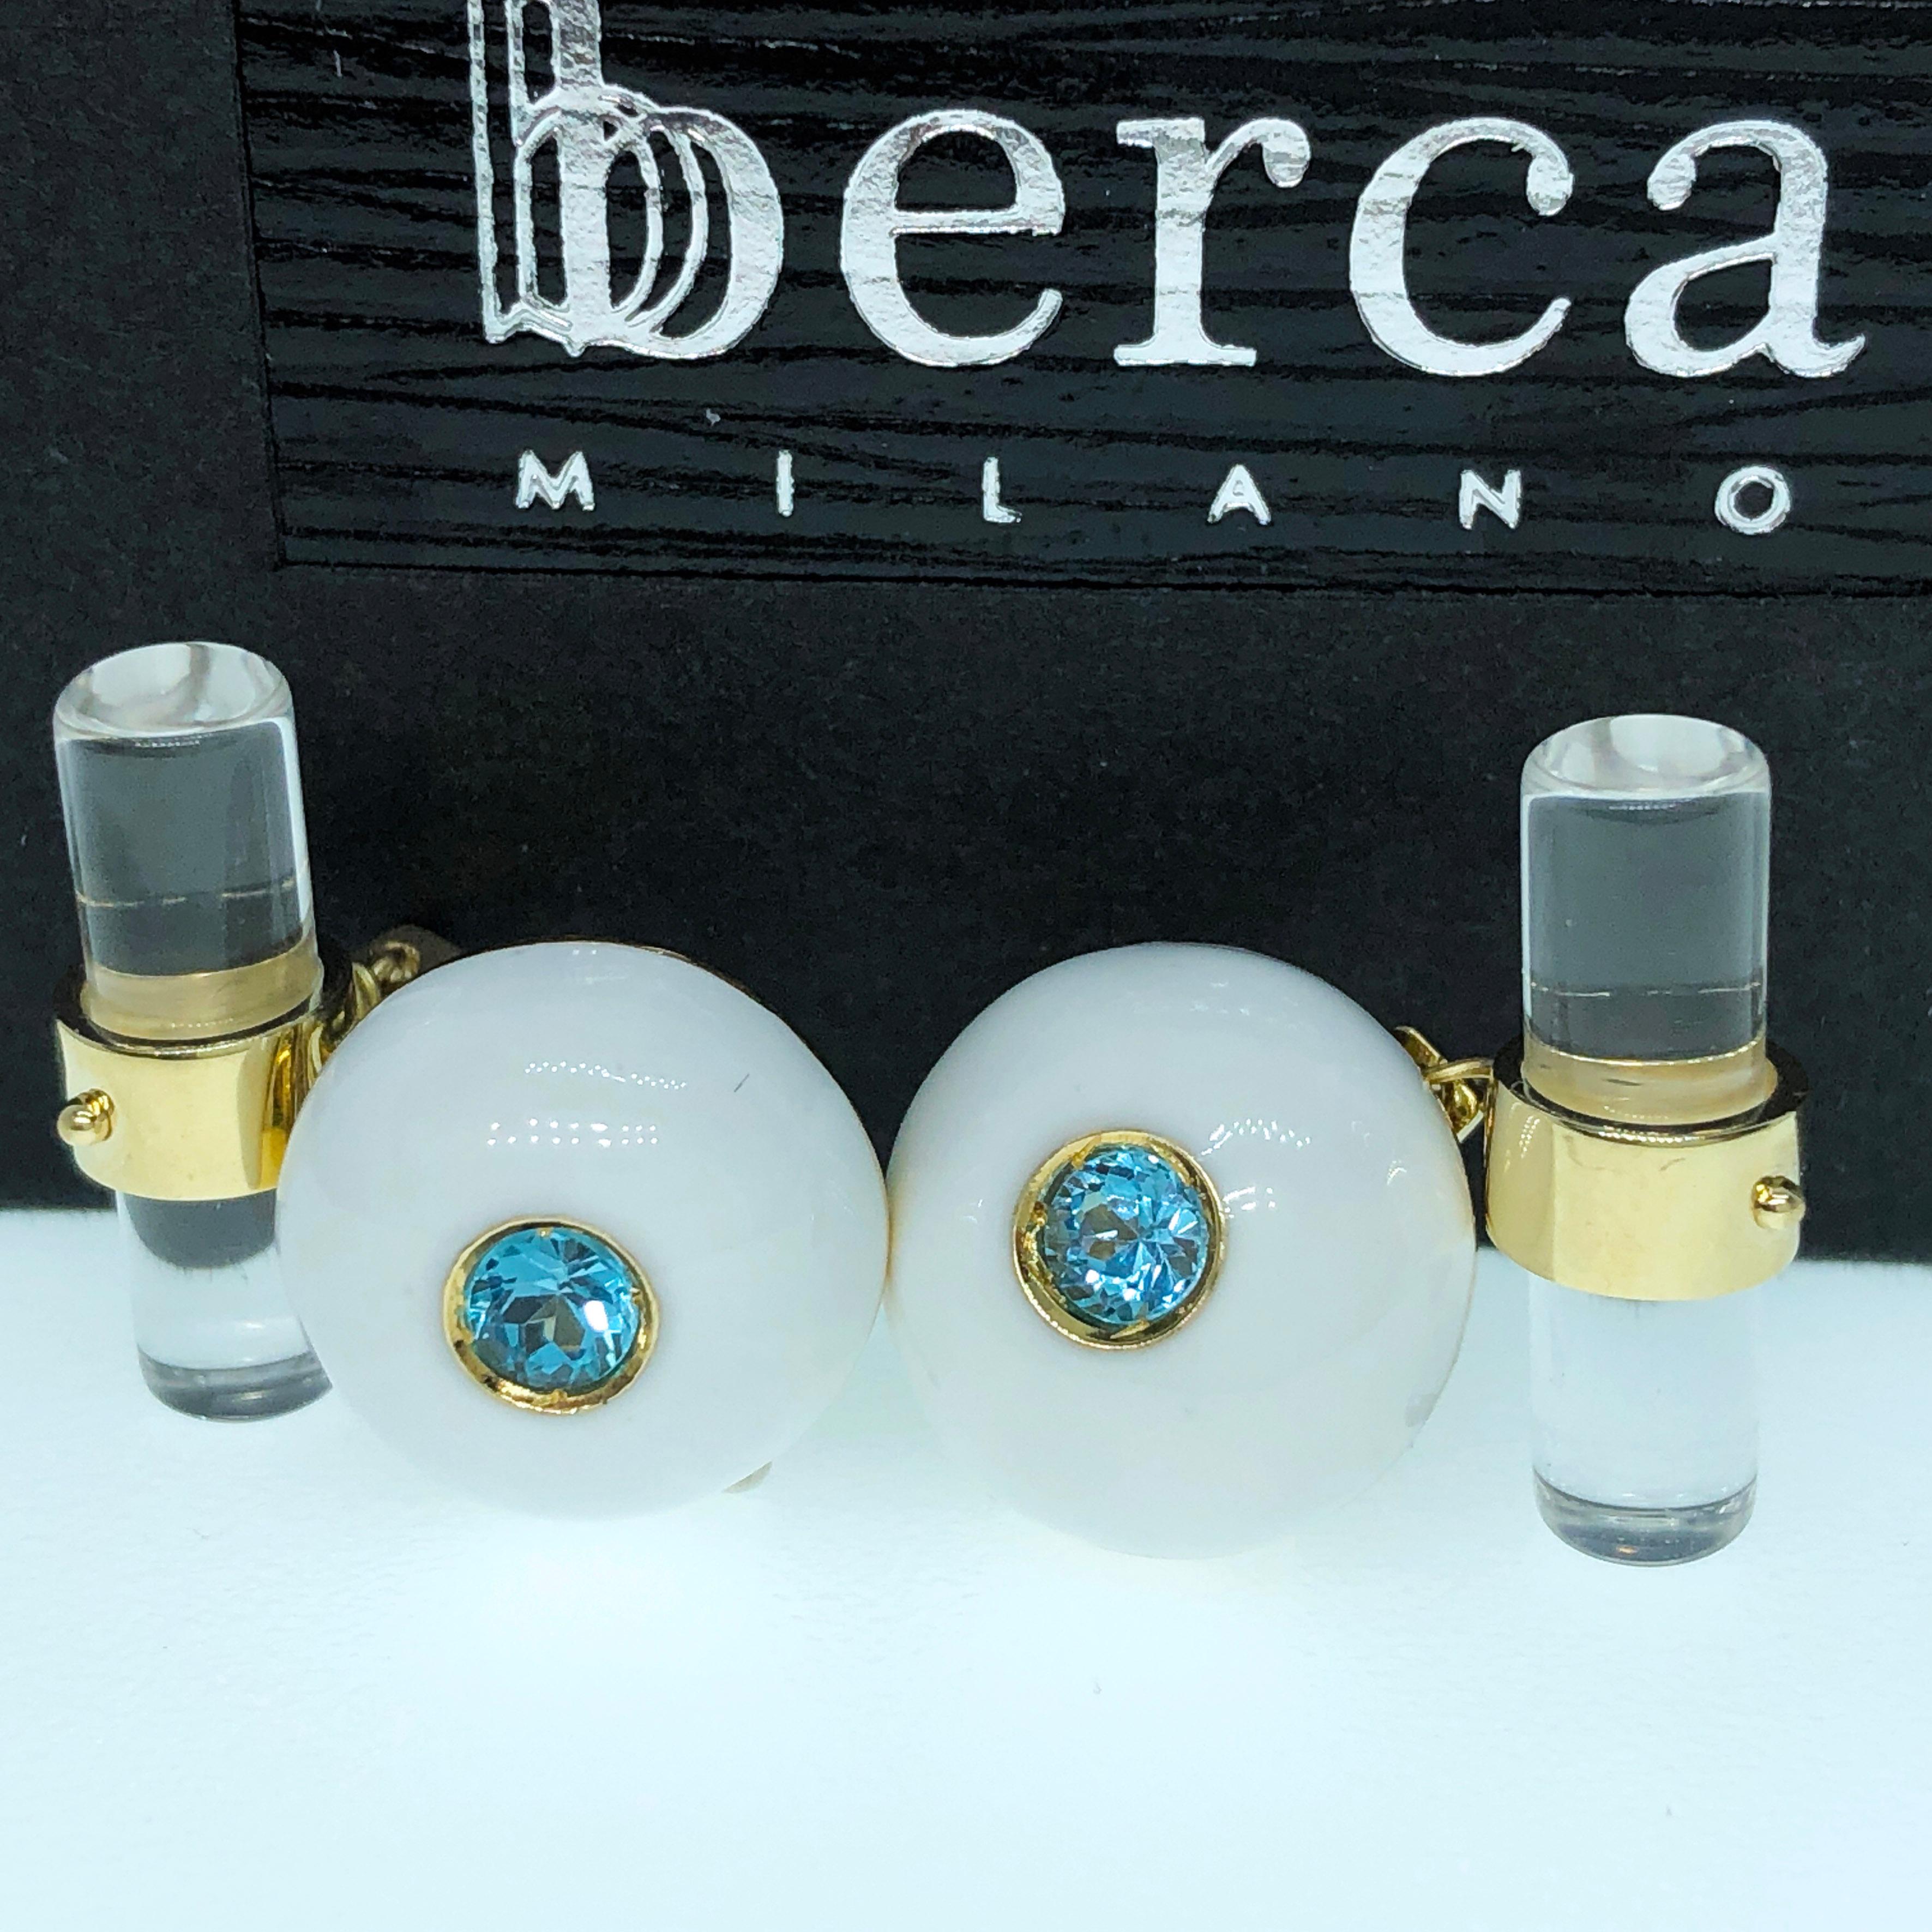 Chic and Timeless 0.45 Carat Natural Brilliant Cut Aquamarine in a White Hand Enameled Round Cabochon Yellow Gold Setting, Hand Inlaid Rock Crystal Baton back.
In our Smart Black Box.
We Offer 24 Hours Express Shipping to Several Destinations.